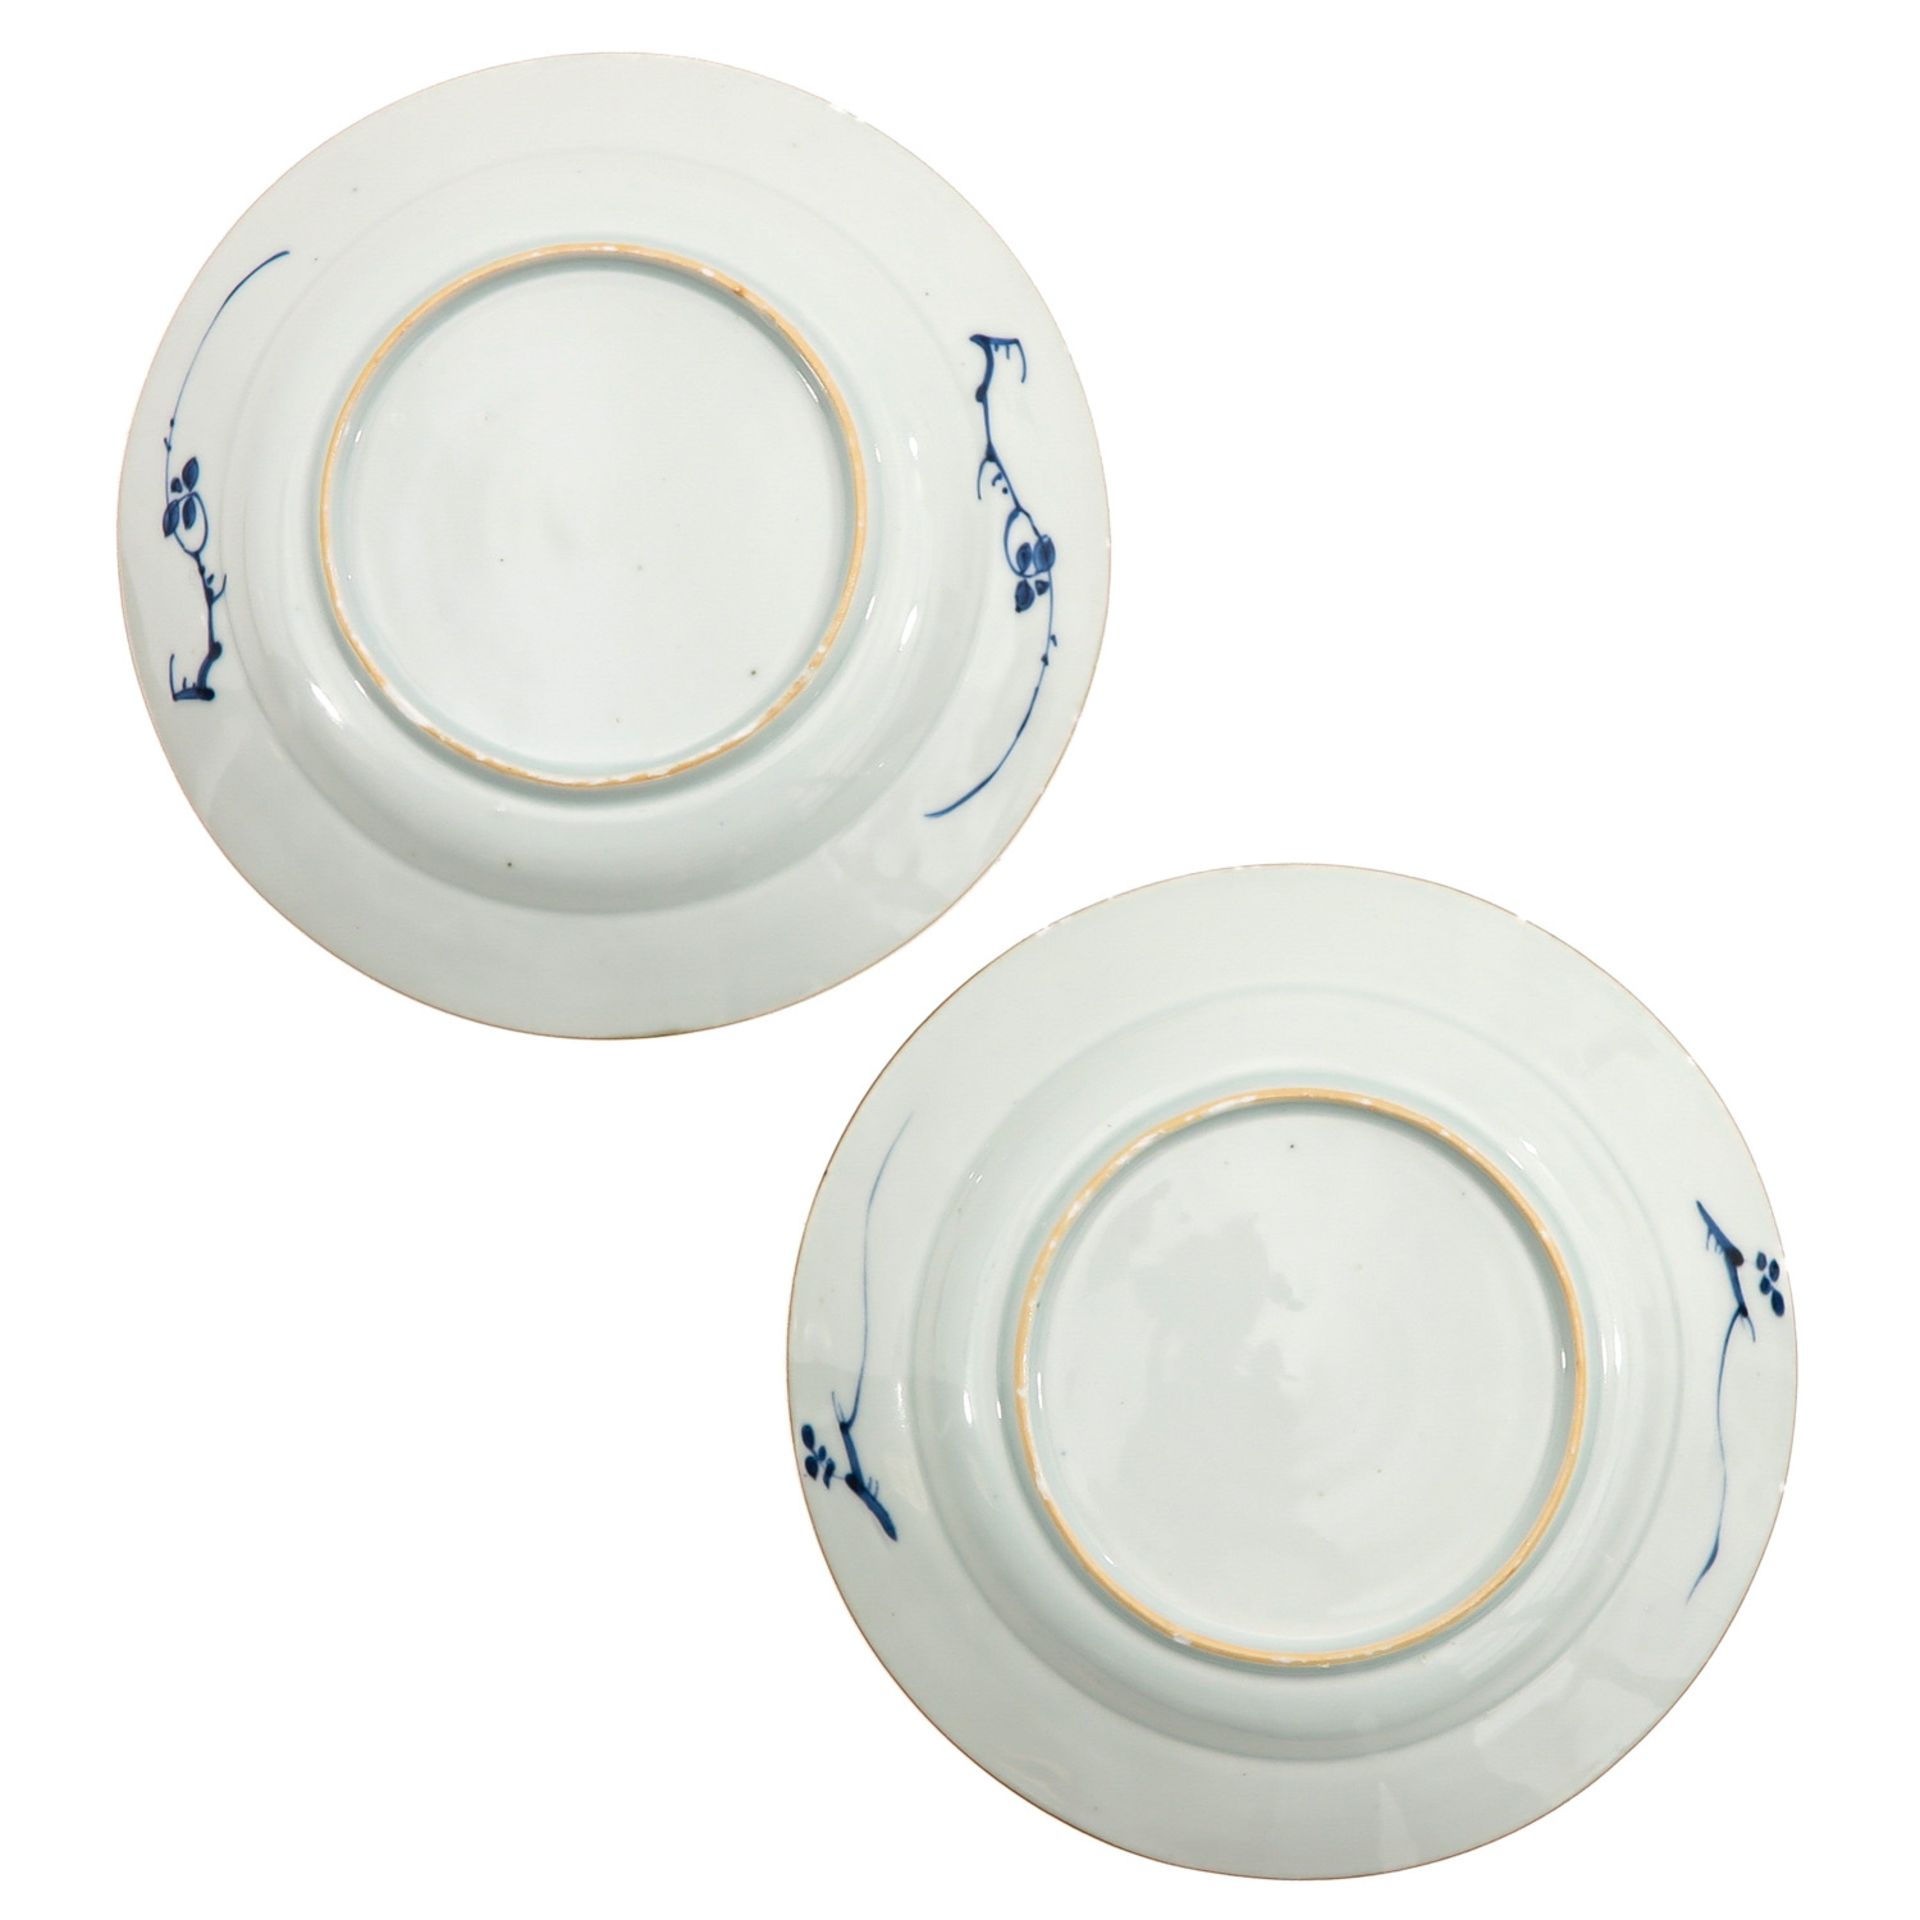 A Series of 4 Blue and White Plates - Image 4 of 9